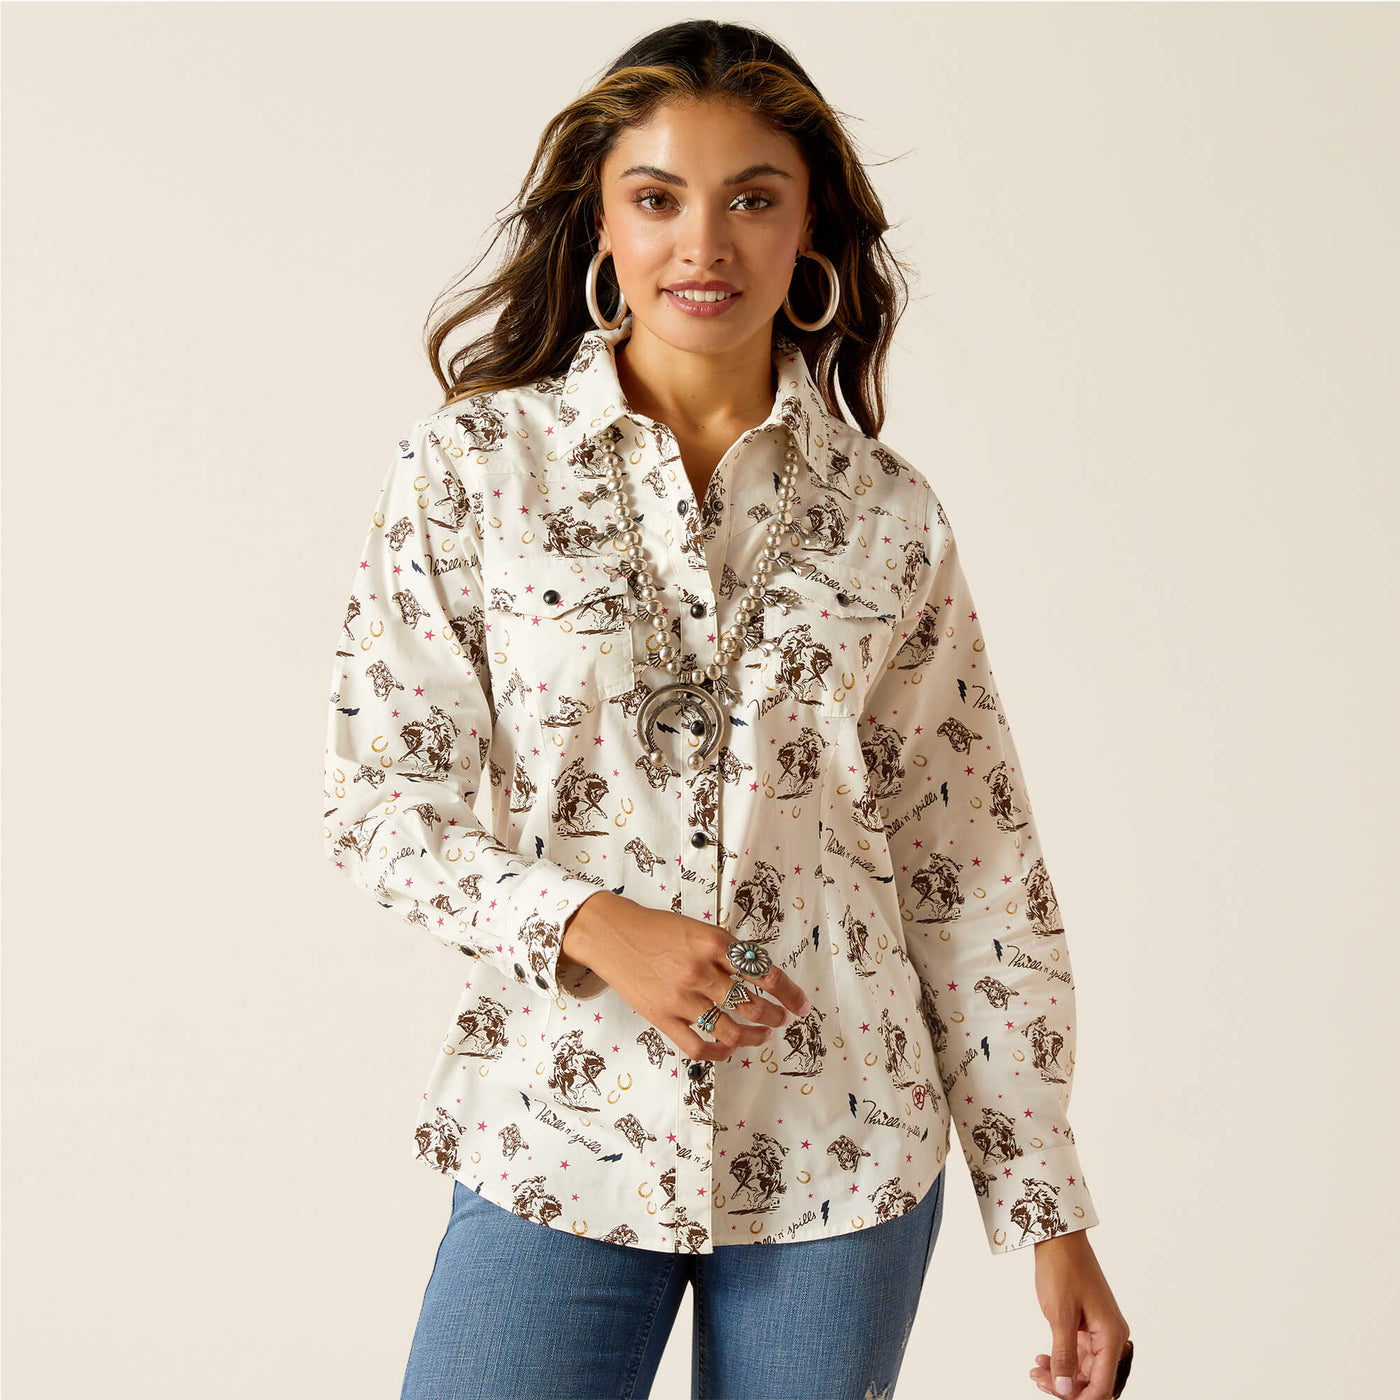 Thrills N Spills Pearl Snap Blouse by Ariat